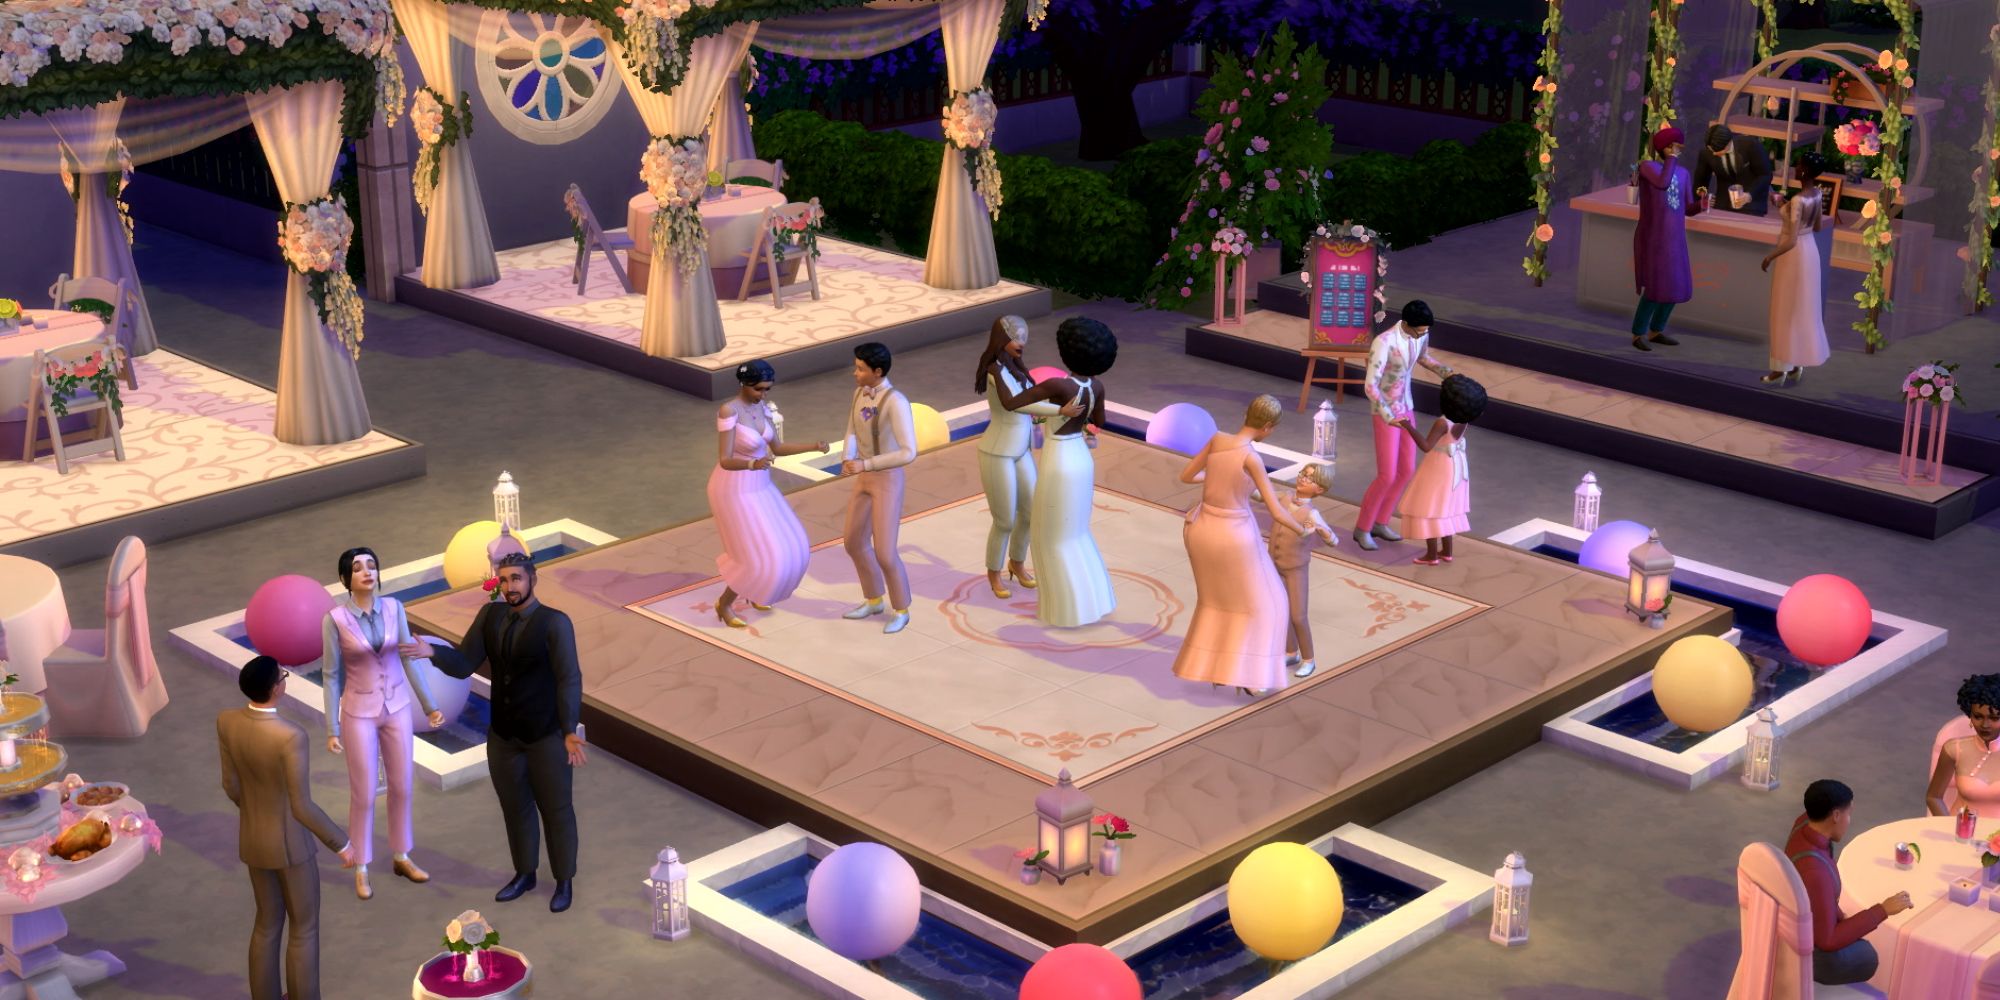 Sims-4-wedding-reception-with-dancing-2